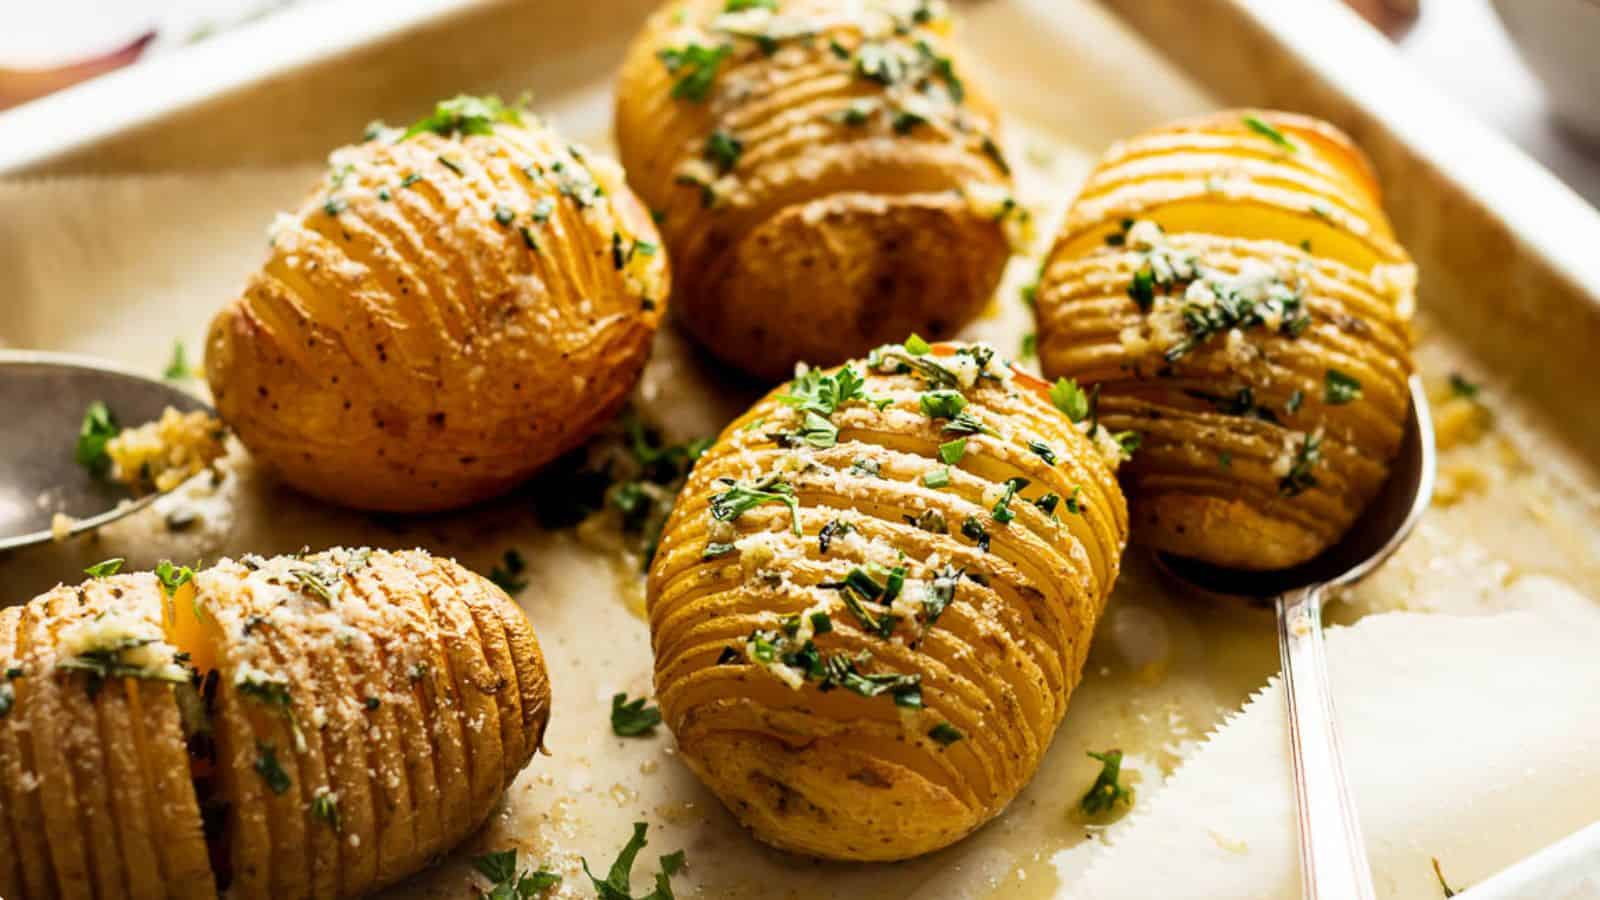 Roasted hasselback potatoes on a baking sheet with parmesan.